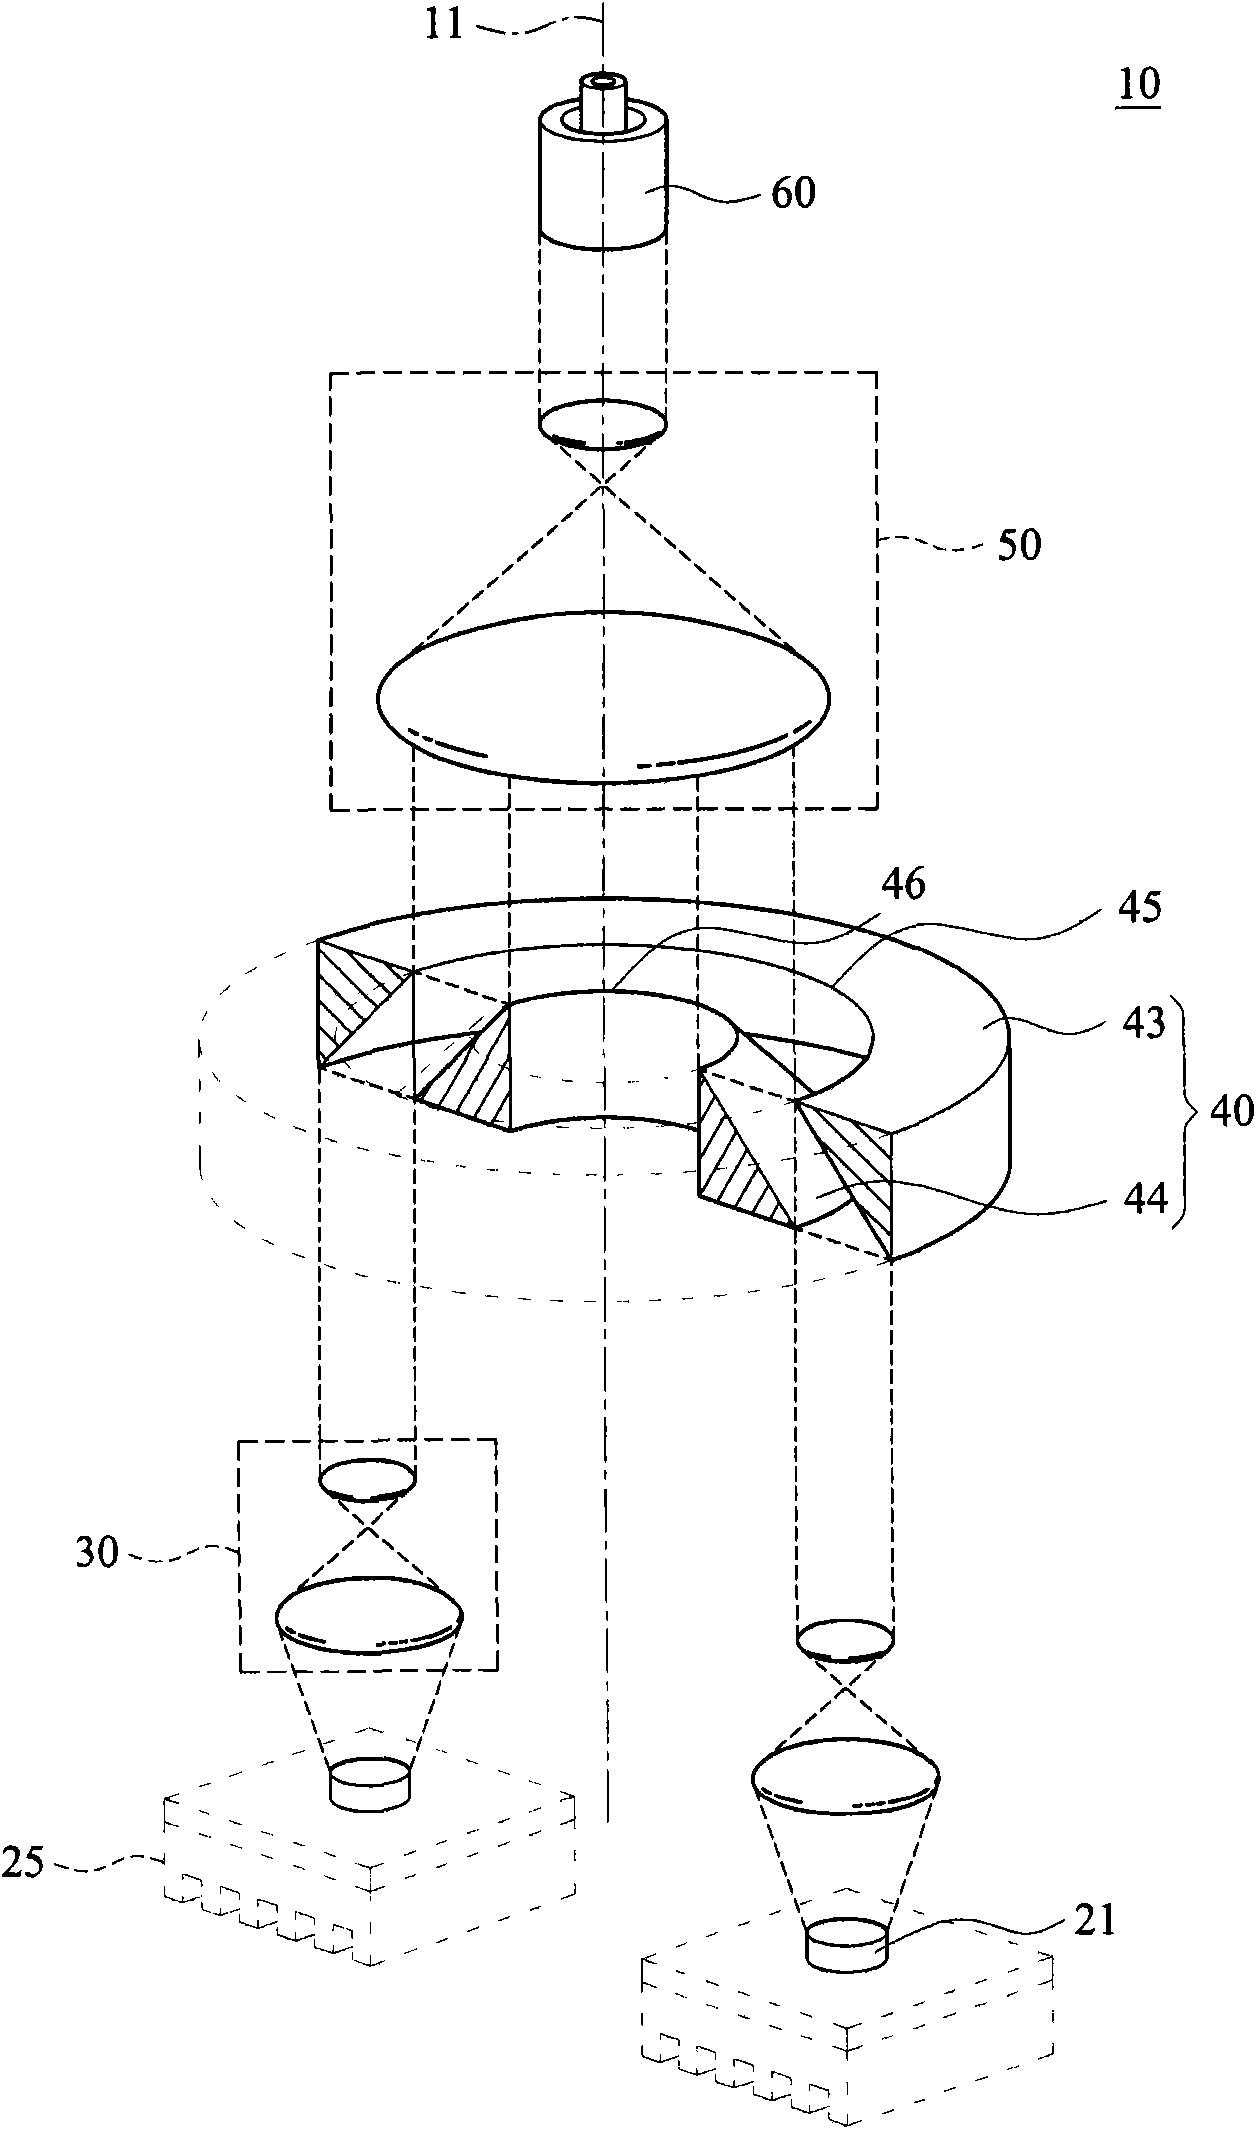 Endoscope light source module structure with light-emitting diodes